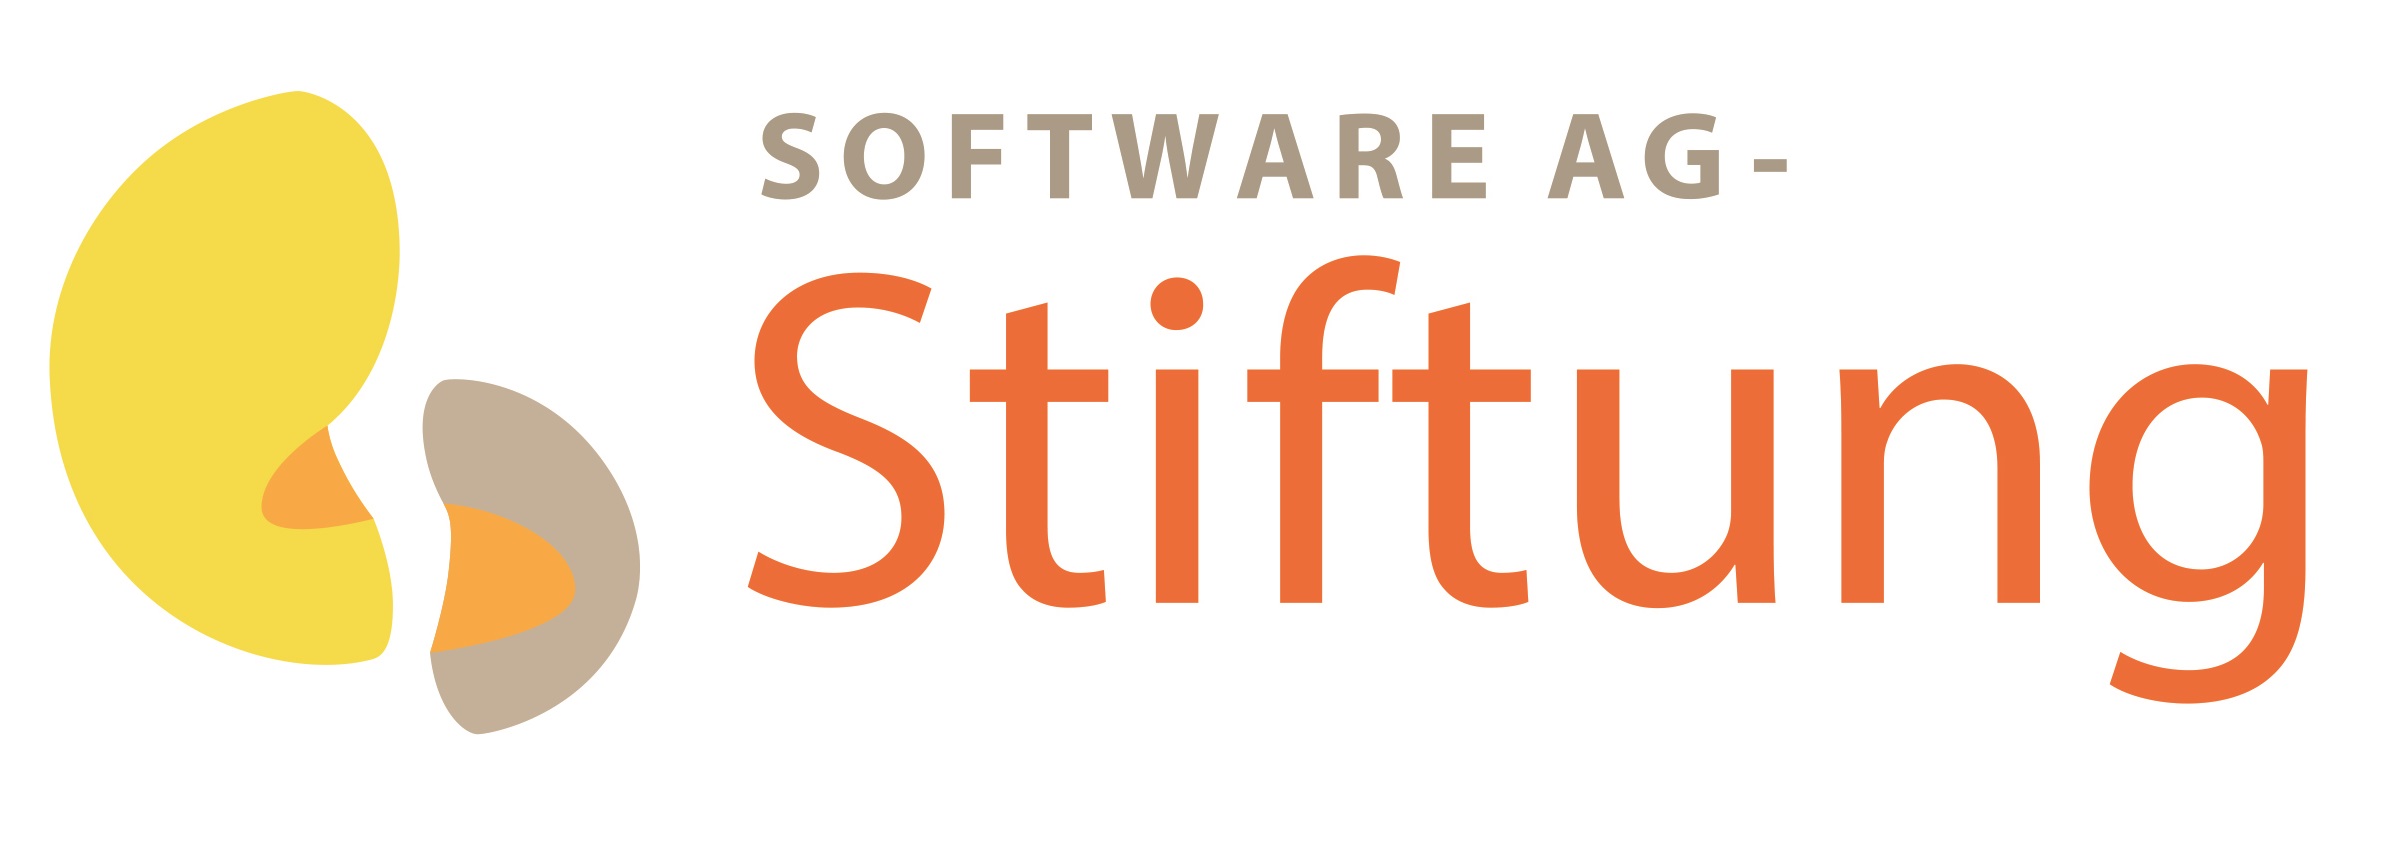 Software AG - Stiftung